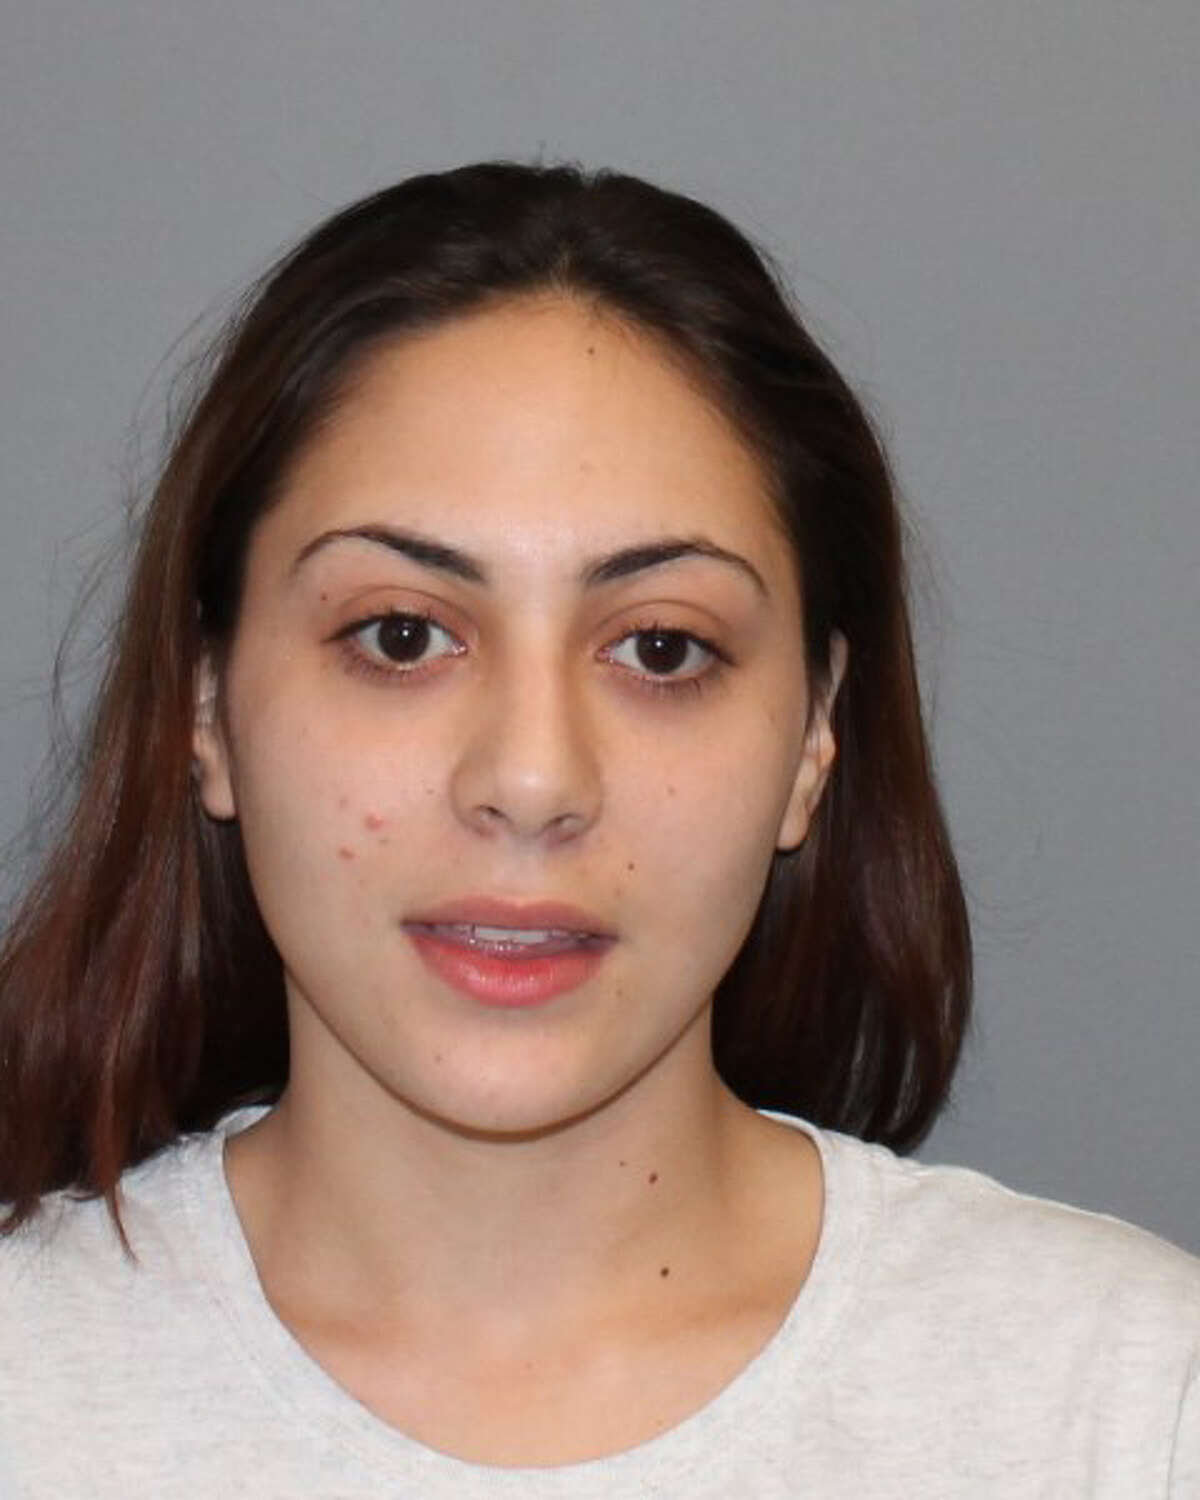 Hilary Guillen, 21 of 6 Leuvine St. in Norwalk, was arrested on Thursday, April 15, 2016 on numerous drug charges. Police said in Guillen, 21 of 6 Leuvine St., is the girlfriend of Sylvester Edwards who was arrested on April 6, 2016, They said Guillen was continuing the heroin distribution ring while Edwards was incarcerated. Police found a drug factory inside a Flax Hill Road condominium where they seized more than 670 packaged heroin and another 49 grams of the drug. Also found in the “drug factory” were more than 7,000 empty bags ready to be bagged, an electronic scale, multiple ounces of cutting agent, an electronic blender for processing the heroin and cutting agents, hundreds of rubber bands for bundling the packaged heroin, hundreds of plastic bags for packaging and an ink stamp for marking product.